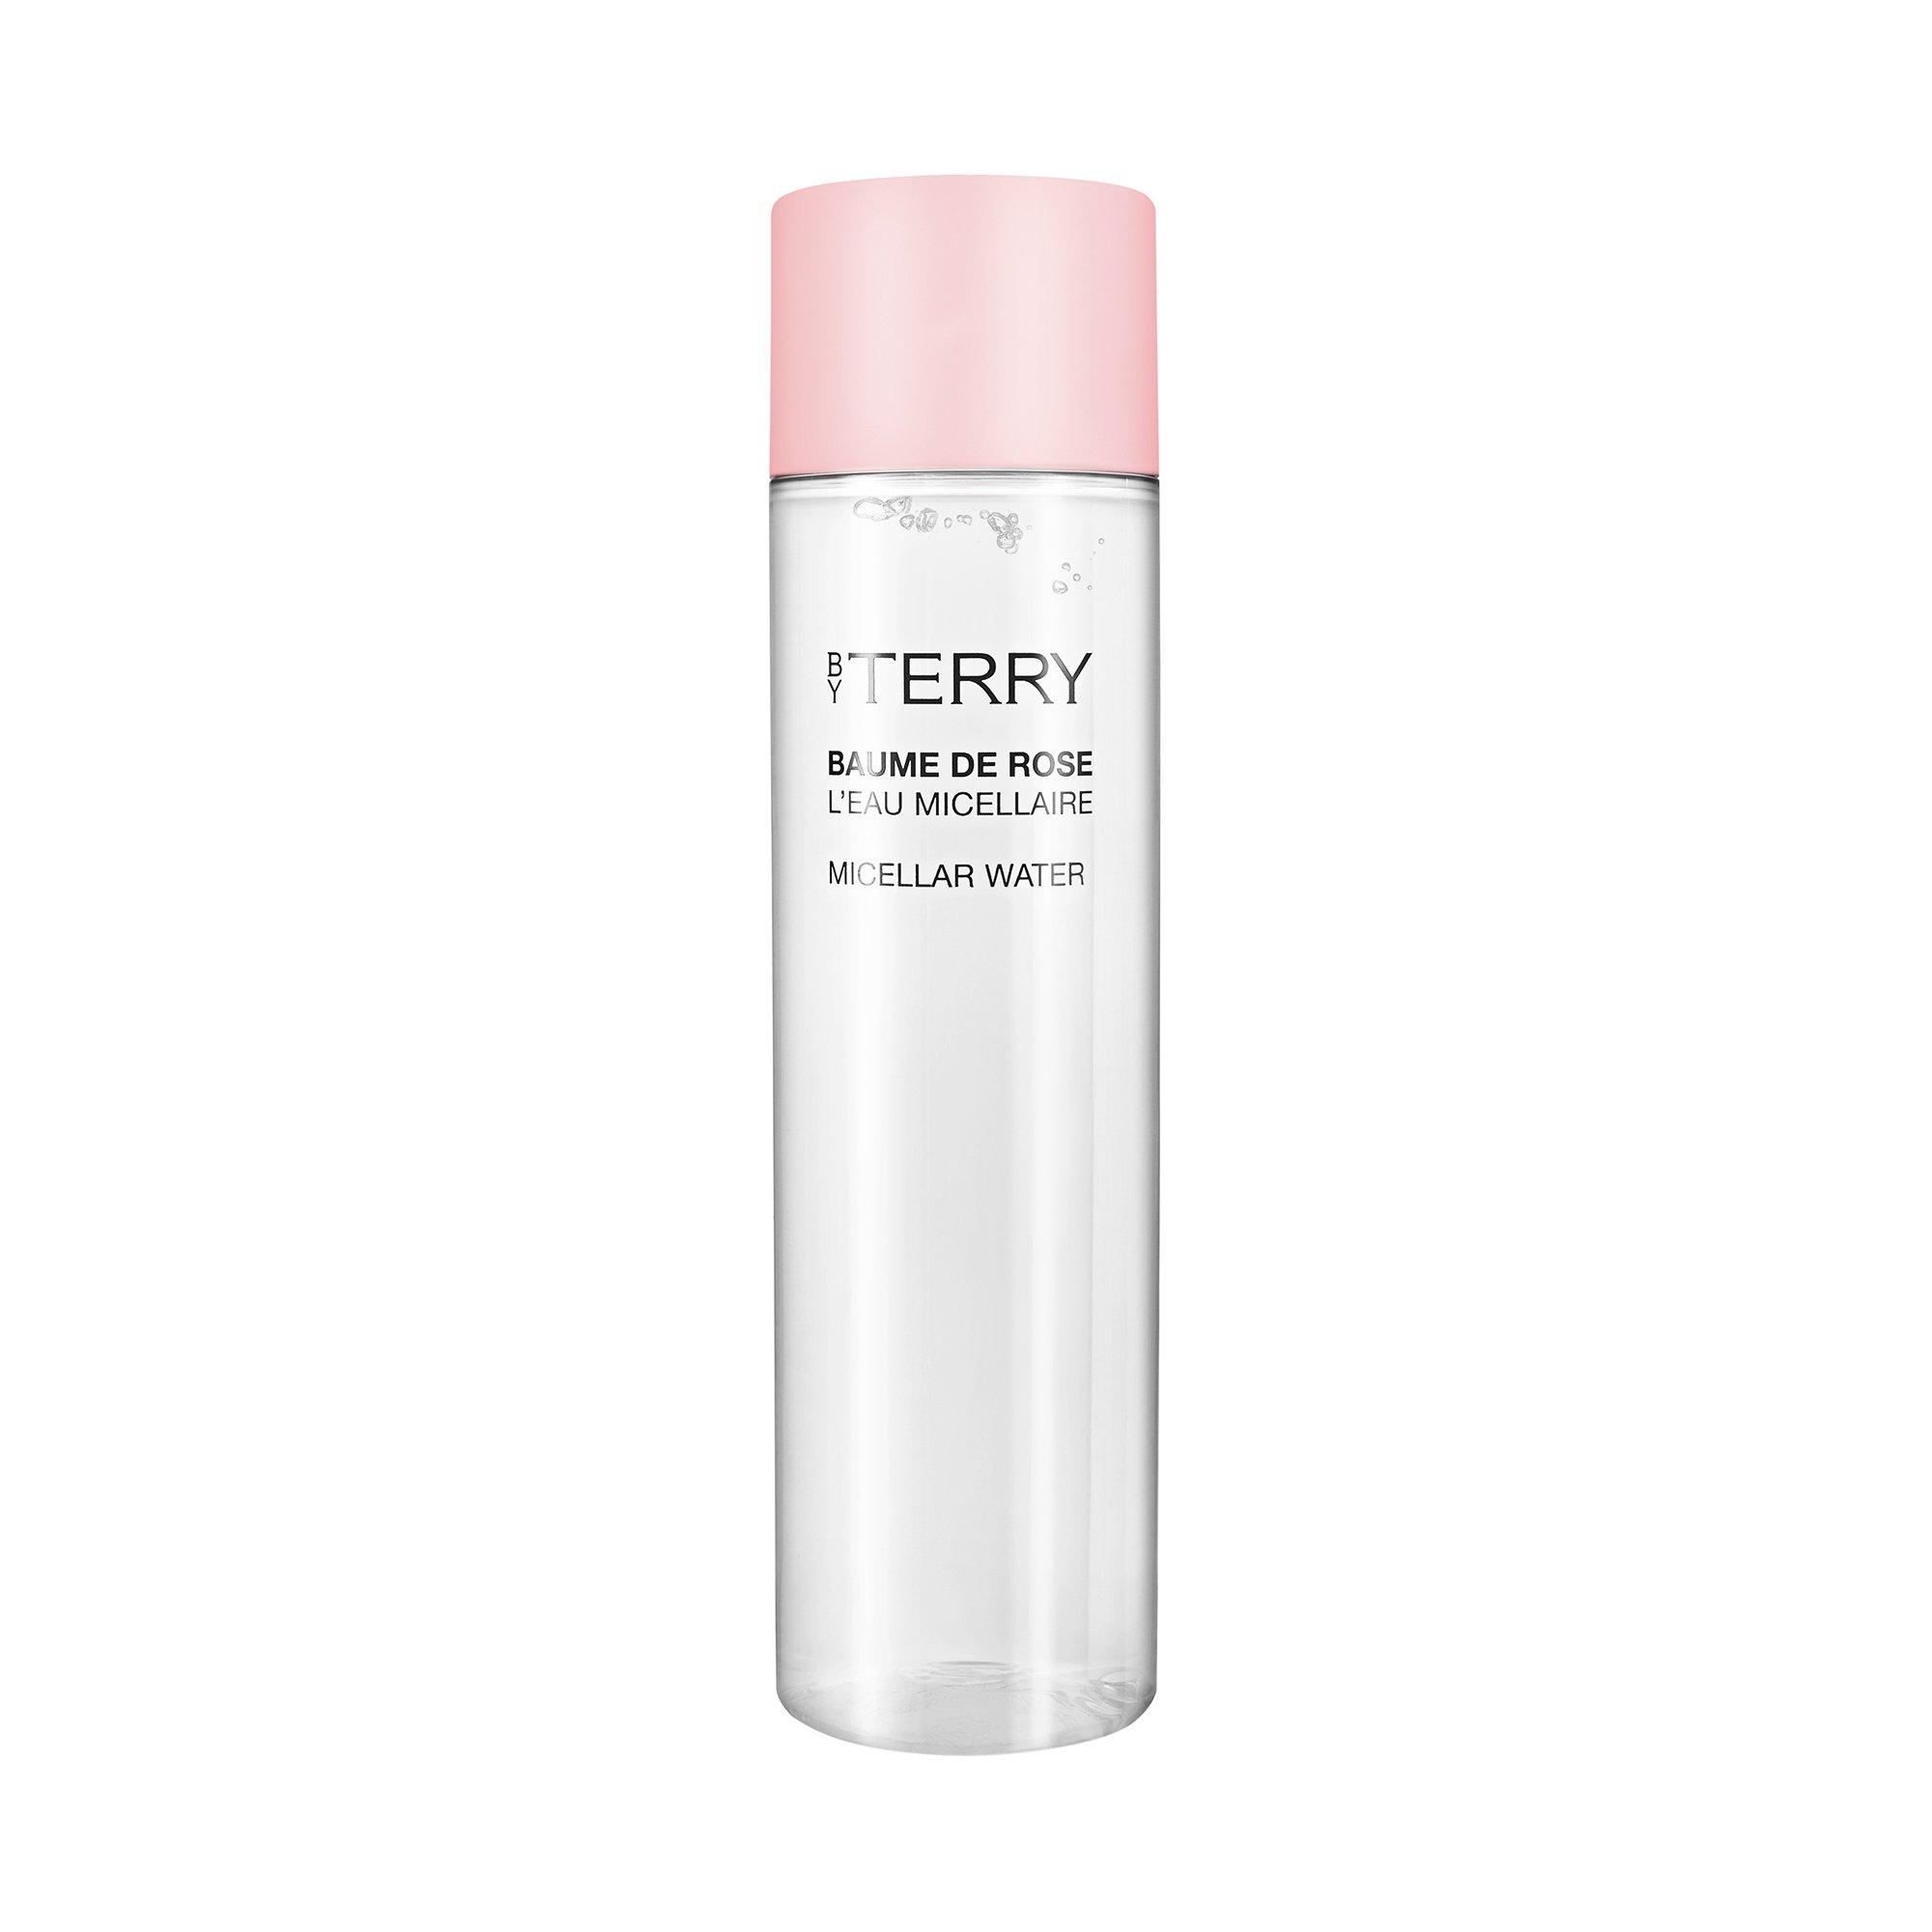 Image of BY TERRY Baume de Rose Micellar Water - 200ml